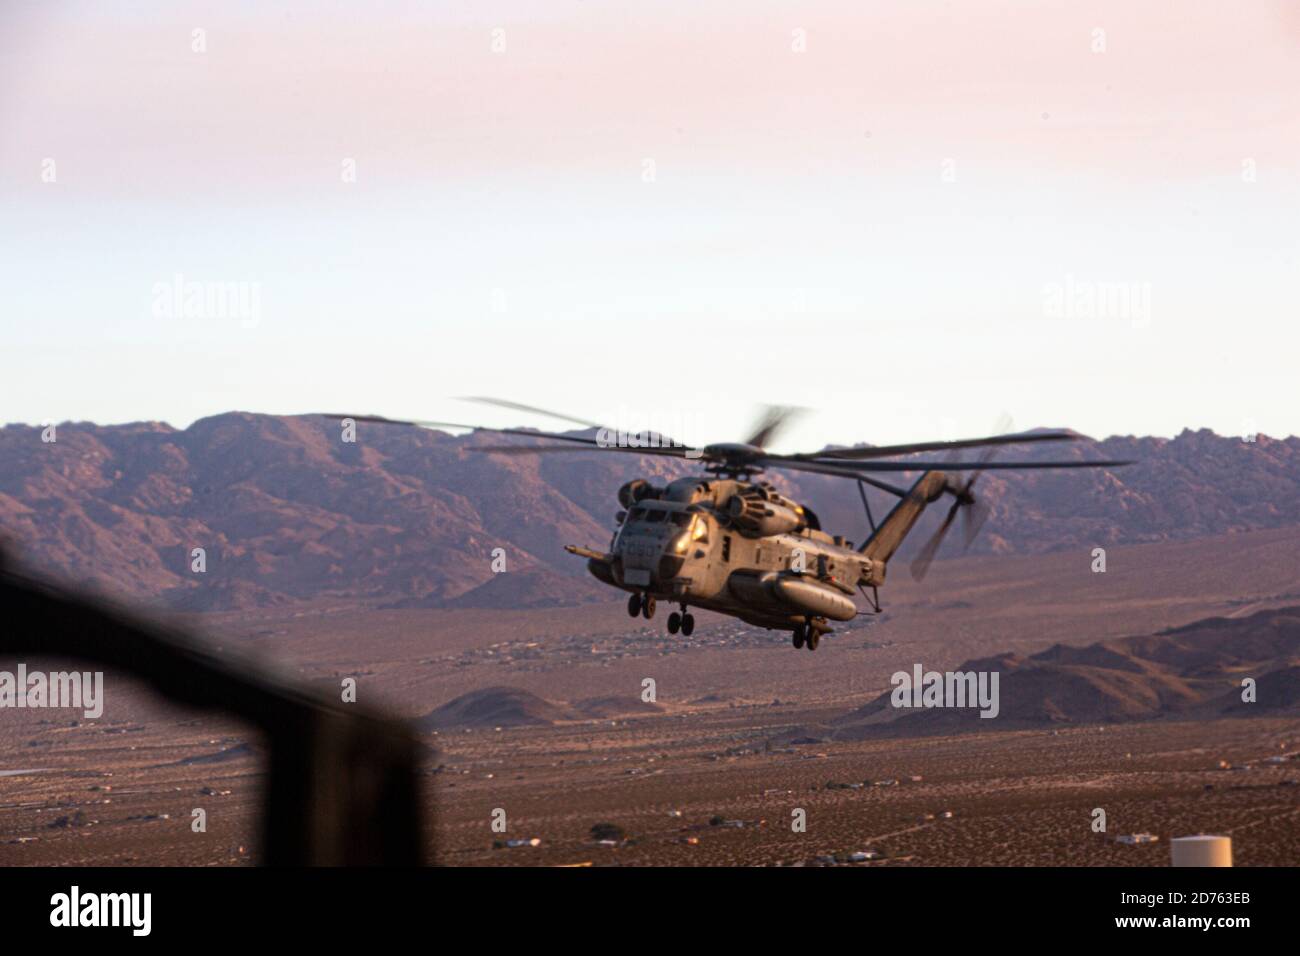 A U.S. Marine Corps CH-53 Super Stallion assigned to Marine Aviation Weapons and Tactics Squadron One (MAWTS-1), participating in Weapons and Tactics Instructor (WTI) course 1-21, flies over Twentynine Palms, California, Oct. 16, 2020. The WTI course is a seven-week training event hosted by MAWTS-1, providing standardized advanced tactical training and certification of unit instructor qualifications to support Marine aviation training and readiness, and assists in developing and employing aviation weapons and tactics. (U.S. Marine Corps photo by Cpl. Juan Dominguez) Stock Photo